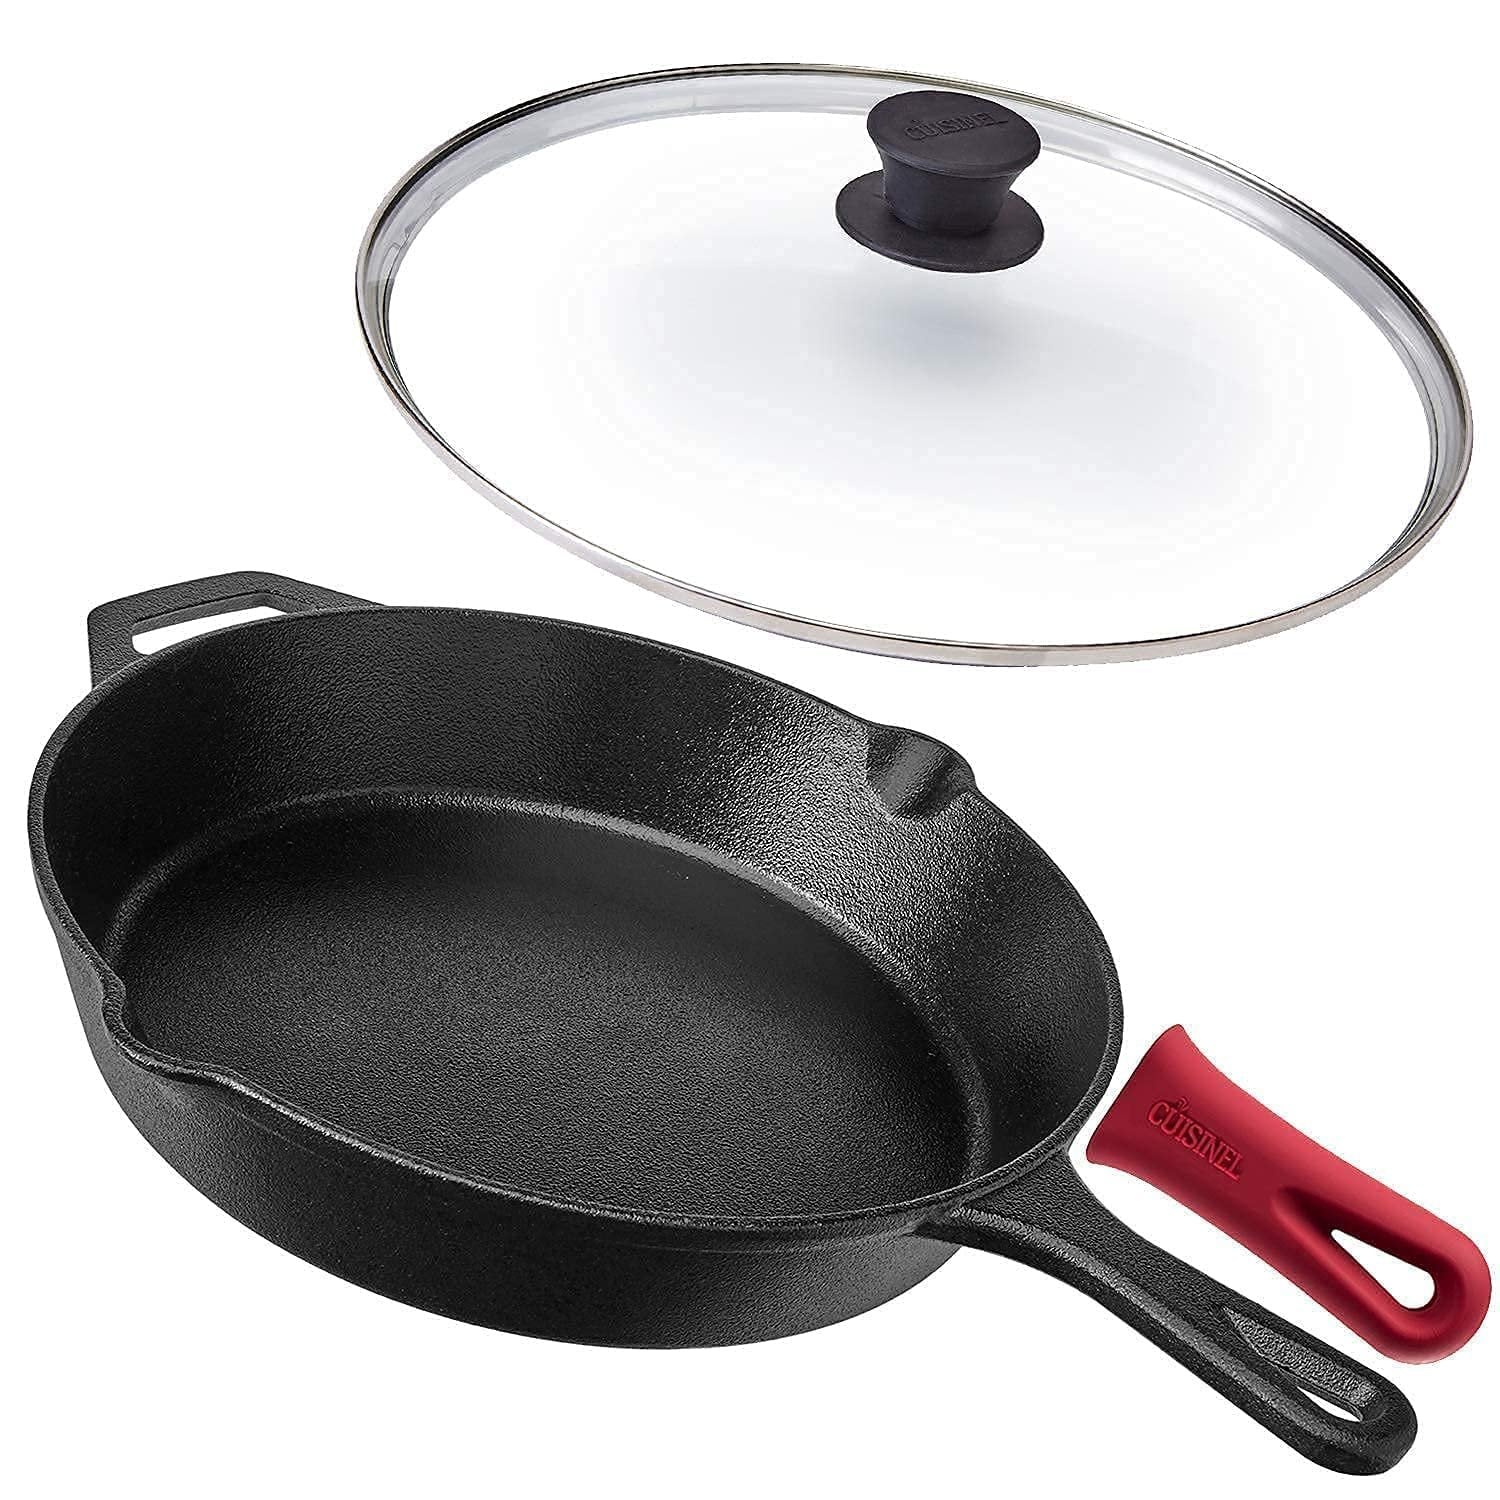 Cuisinel Cast Iron Skillet - 12"-Inch + Glass Lid + Silicone Handle Cover - Preseasoned Oven Safe Cookware - Heat-Resistant Holder - Indoor and Outdoor Use - Grill, Stovetop, Induction Safe